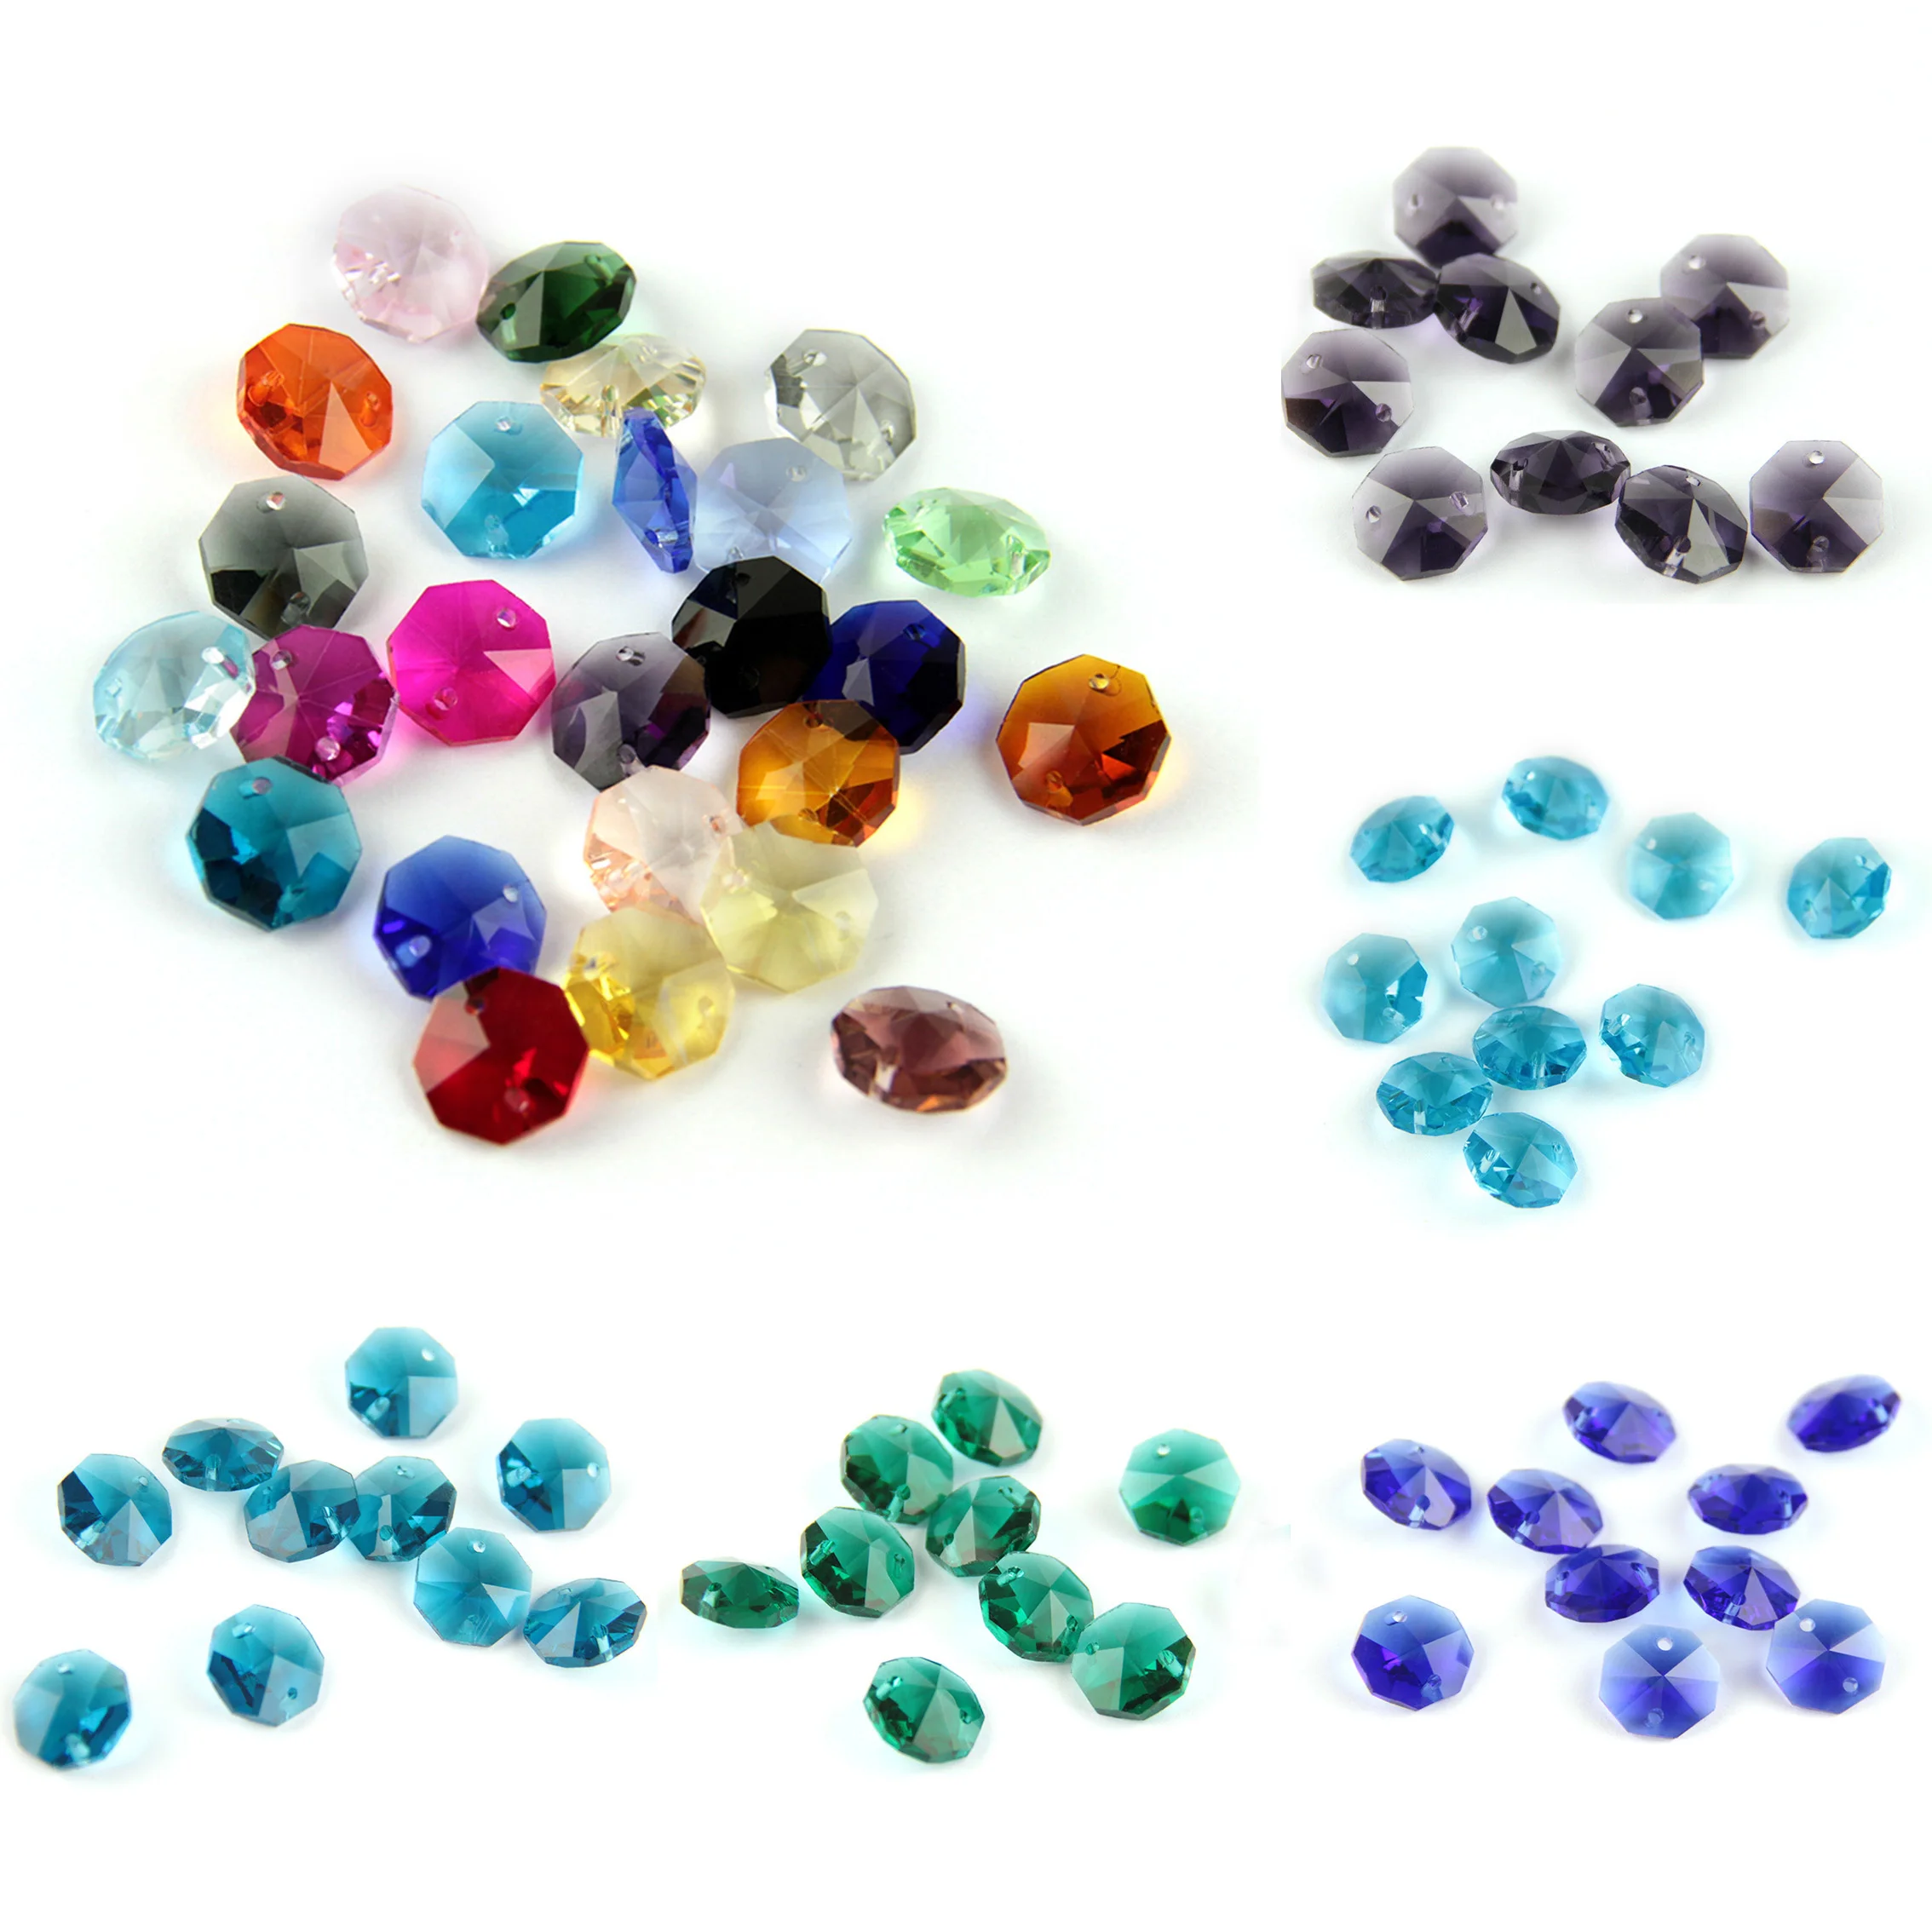 

Honor of crystal Wholesale Mixed Color Octagon Chain Home Crystal Pendants Cristal Decoration Crystal Beads And Prism An